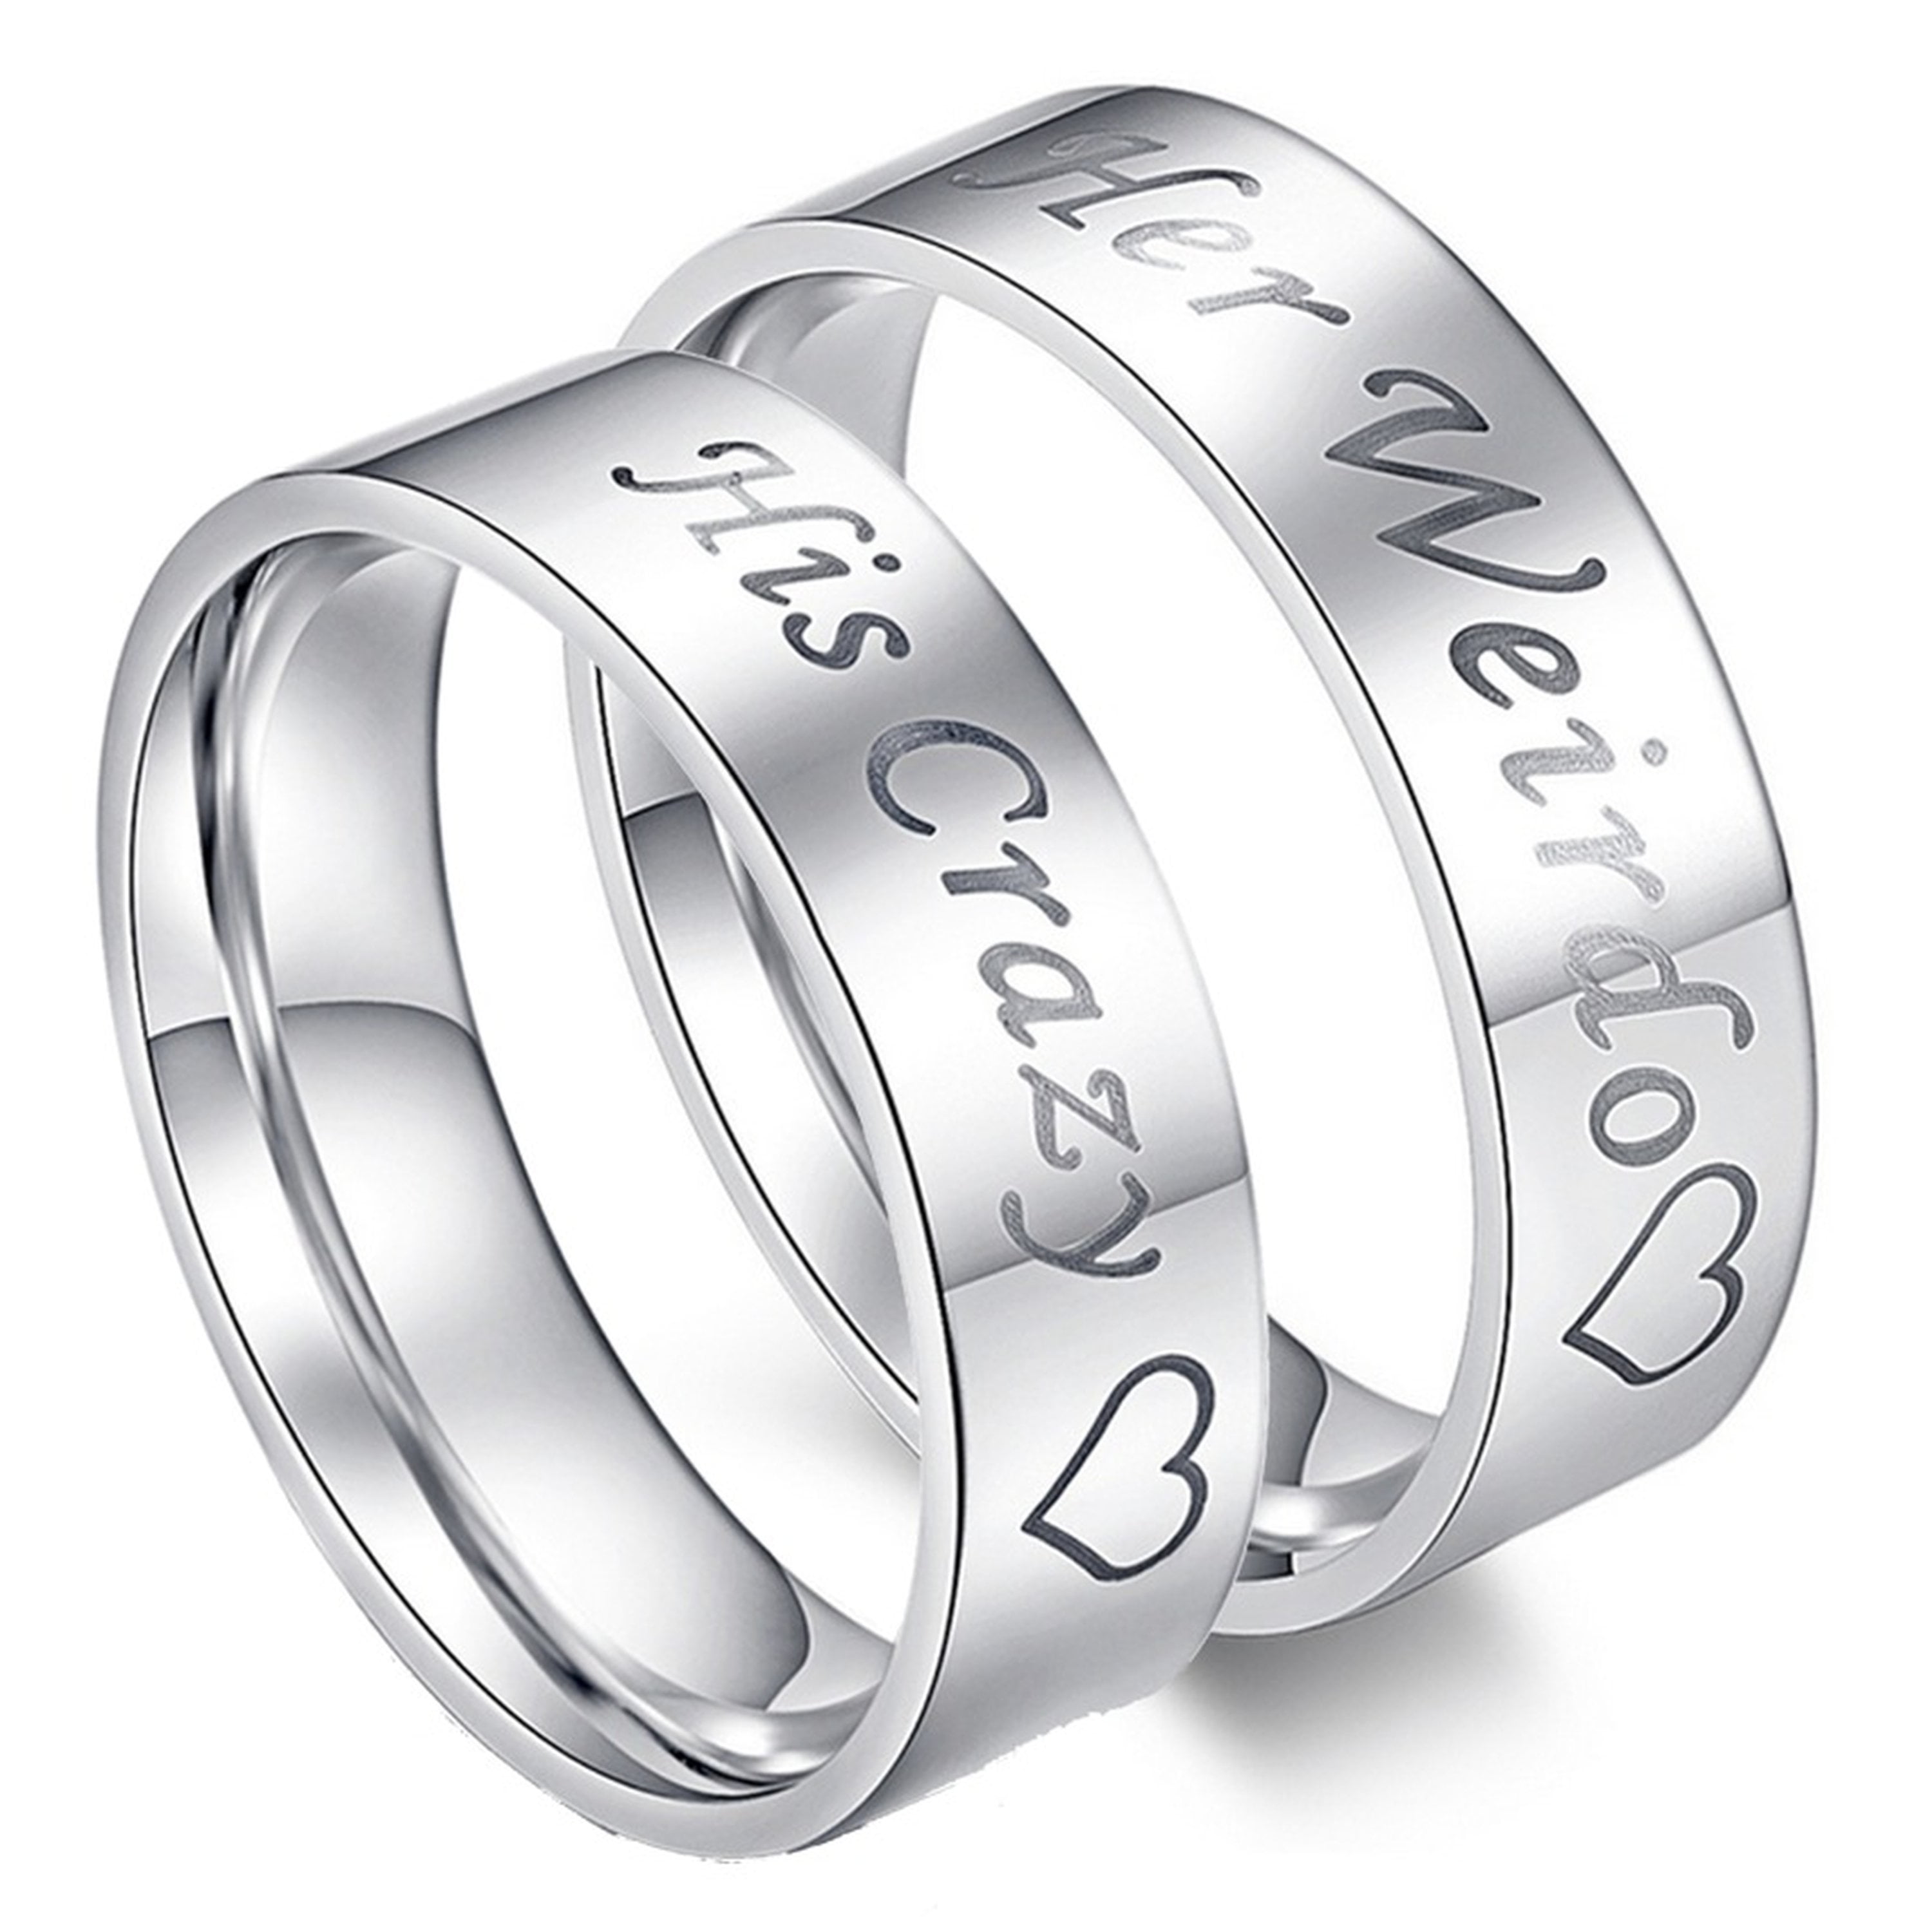 KY Jewelry Engraved Love Couples Ring Stainless Steel Lovers Rings Wedding Engagement for Him & Her Set